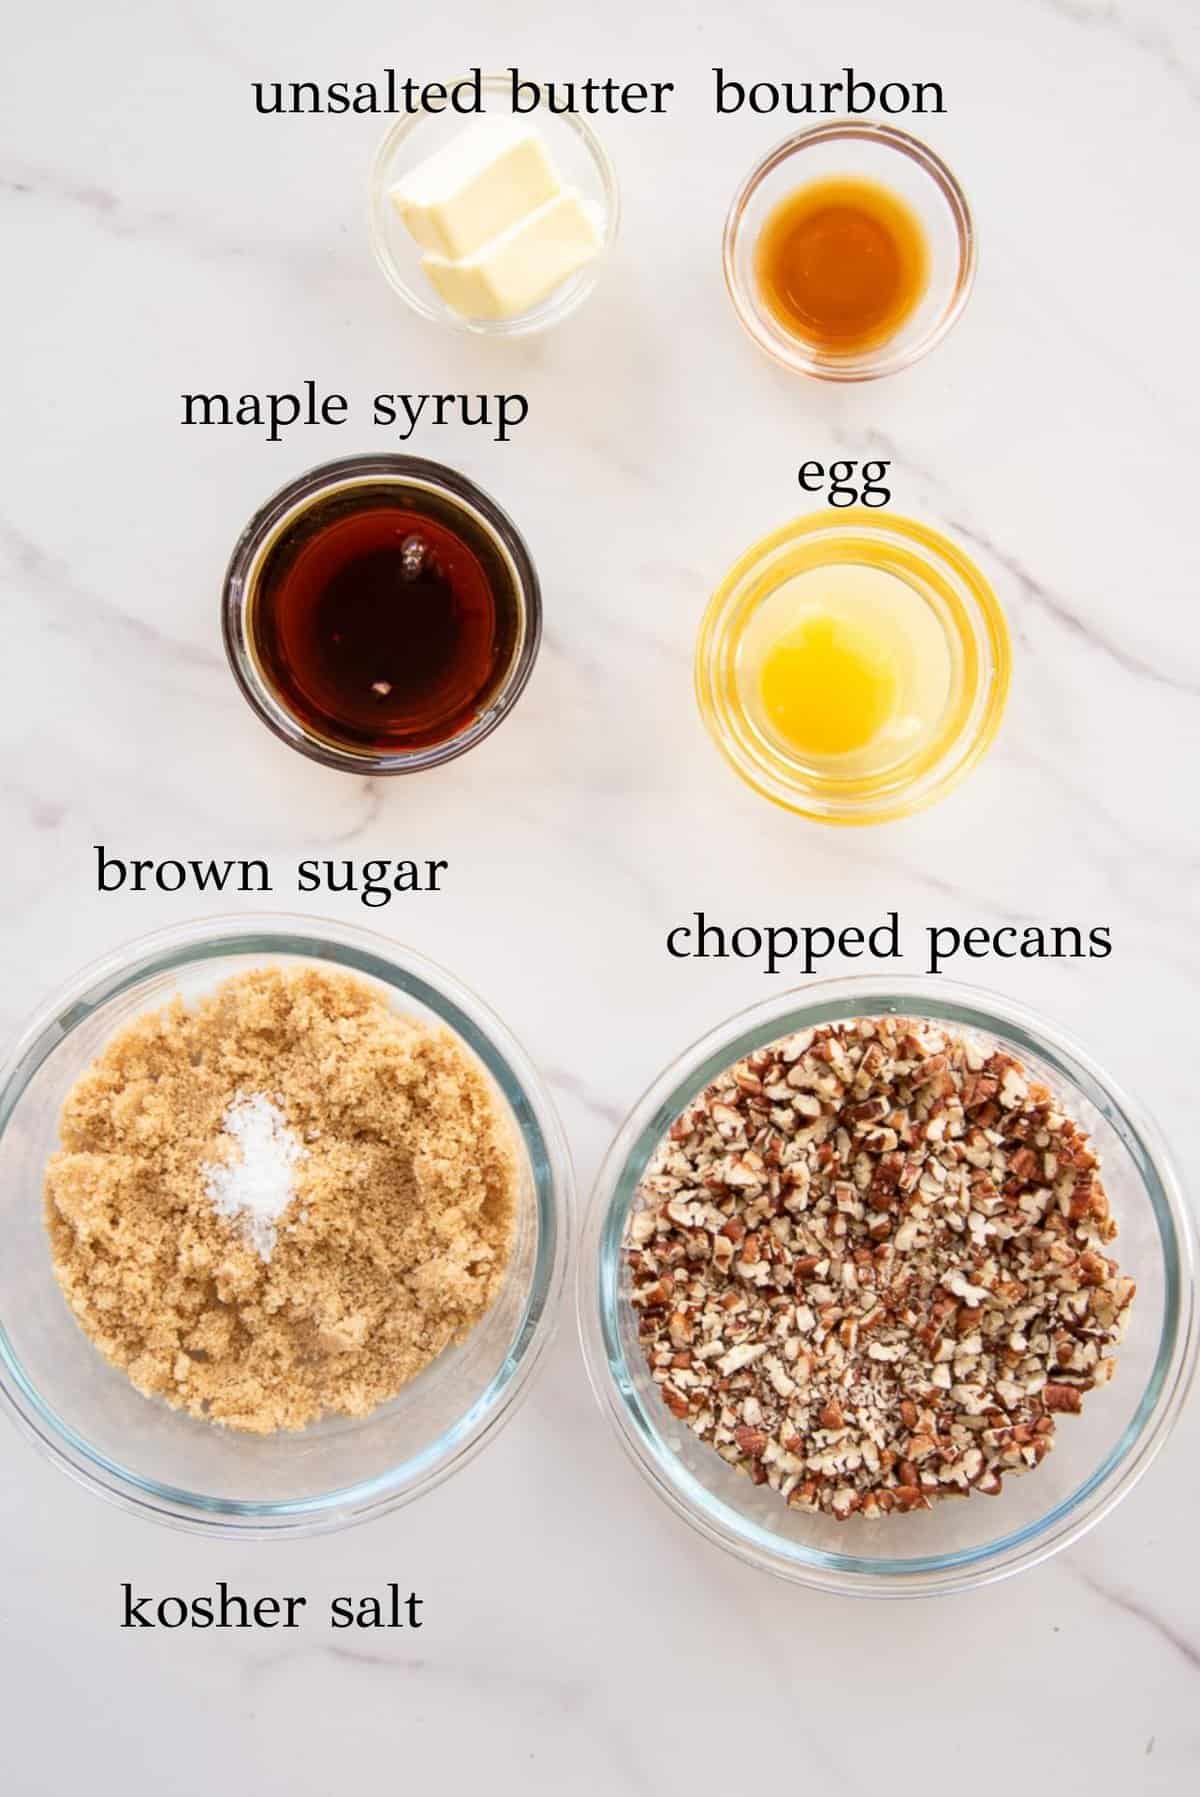 Ingredients needed to make the pecan pie filling